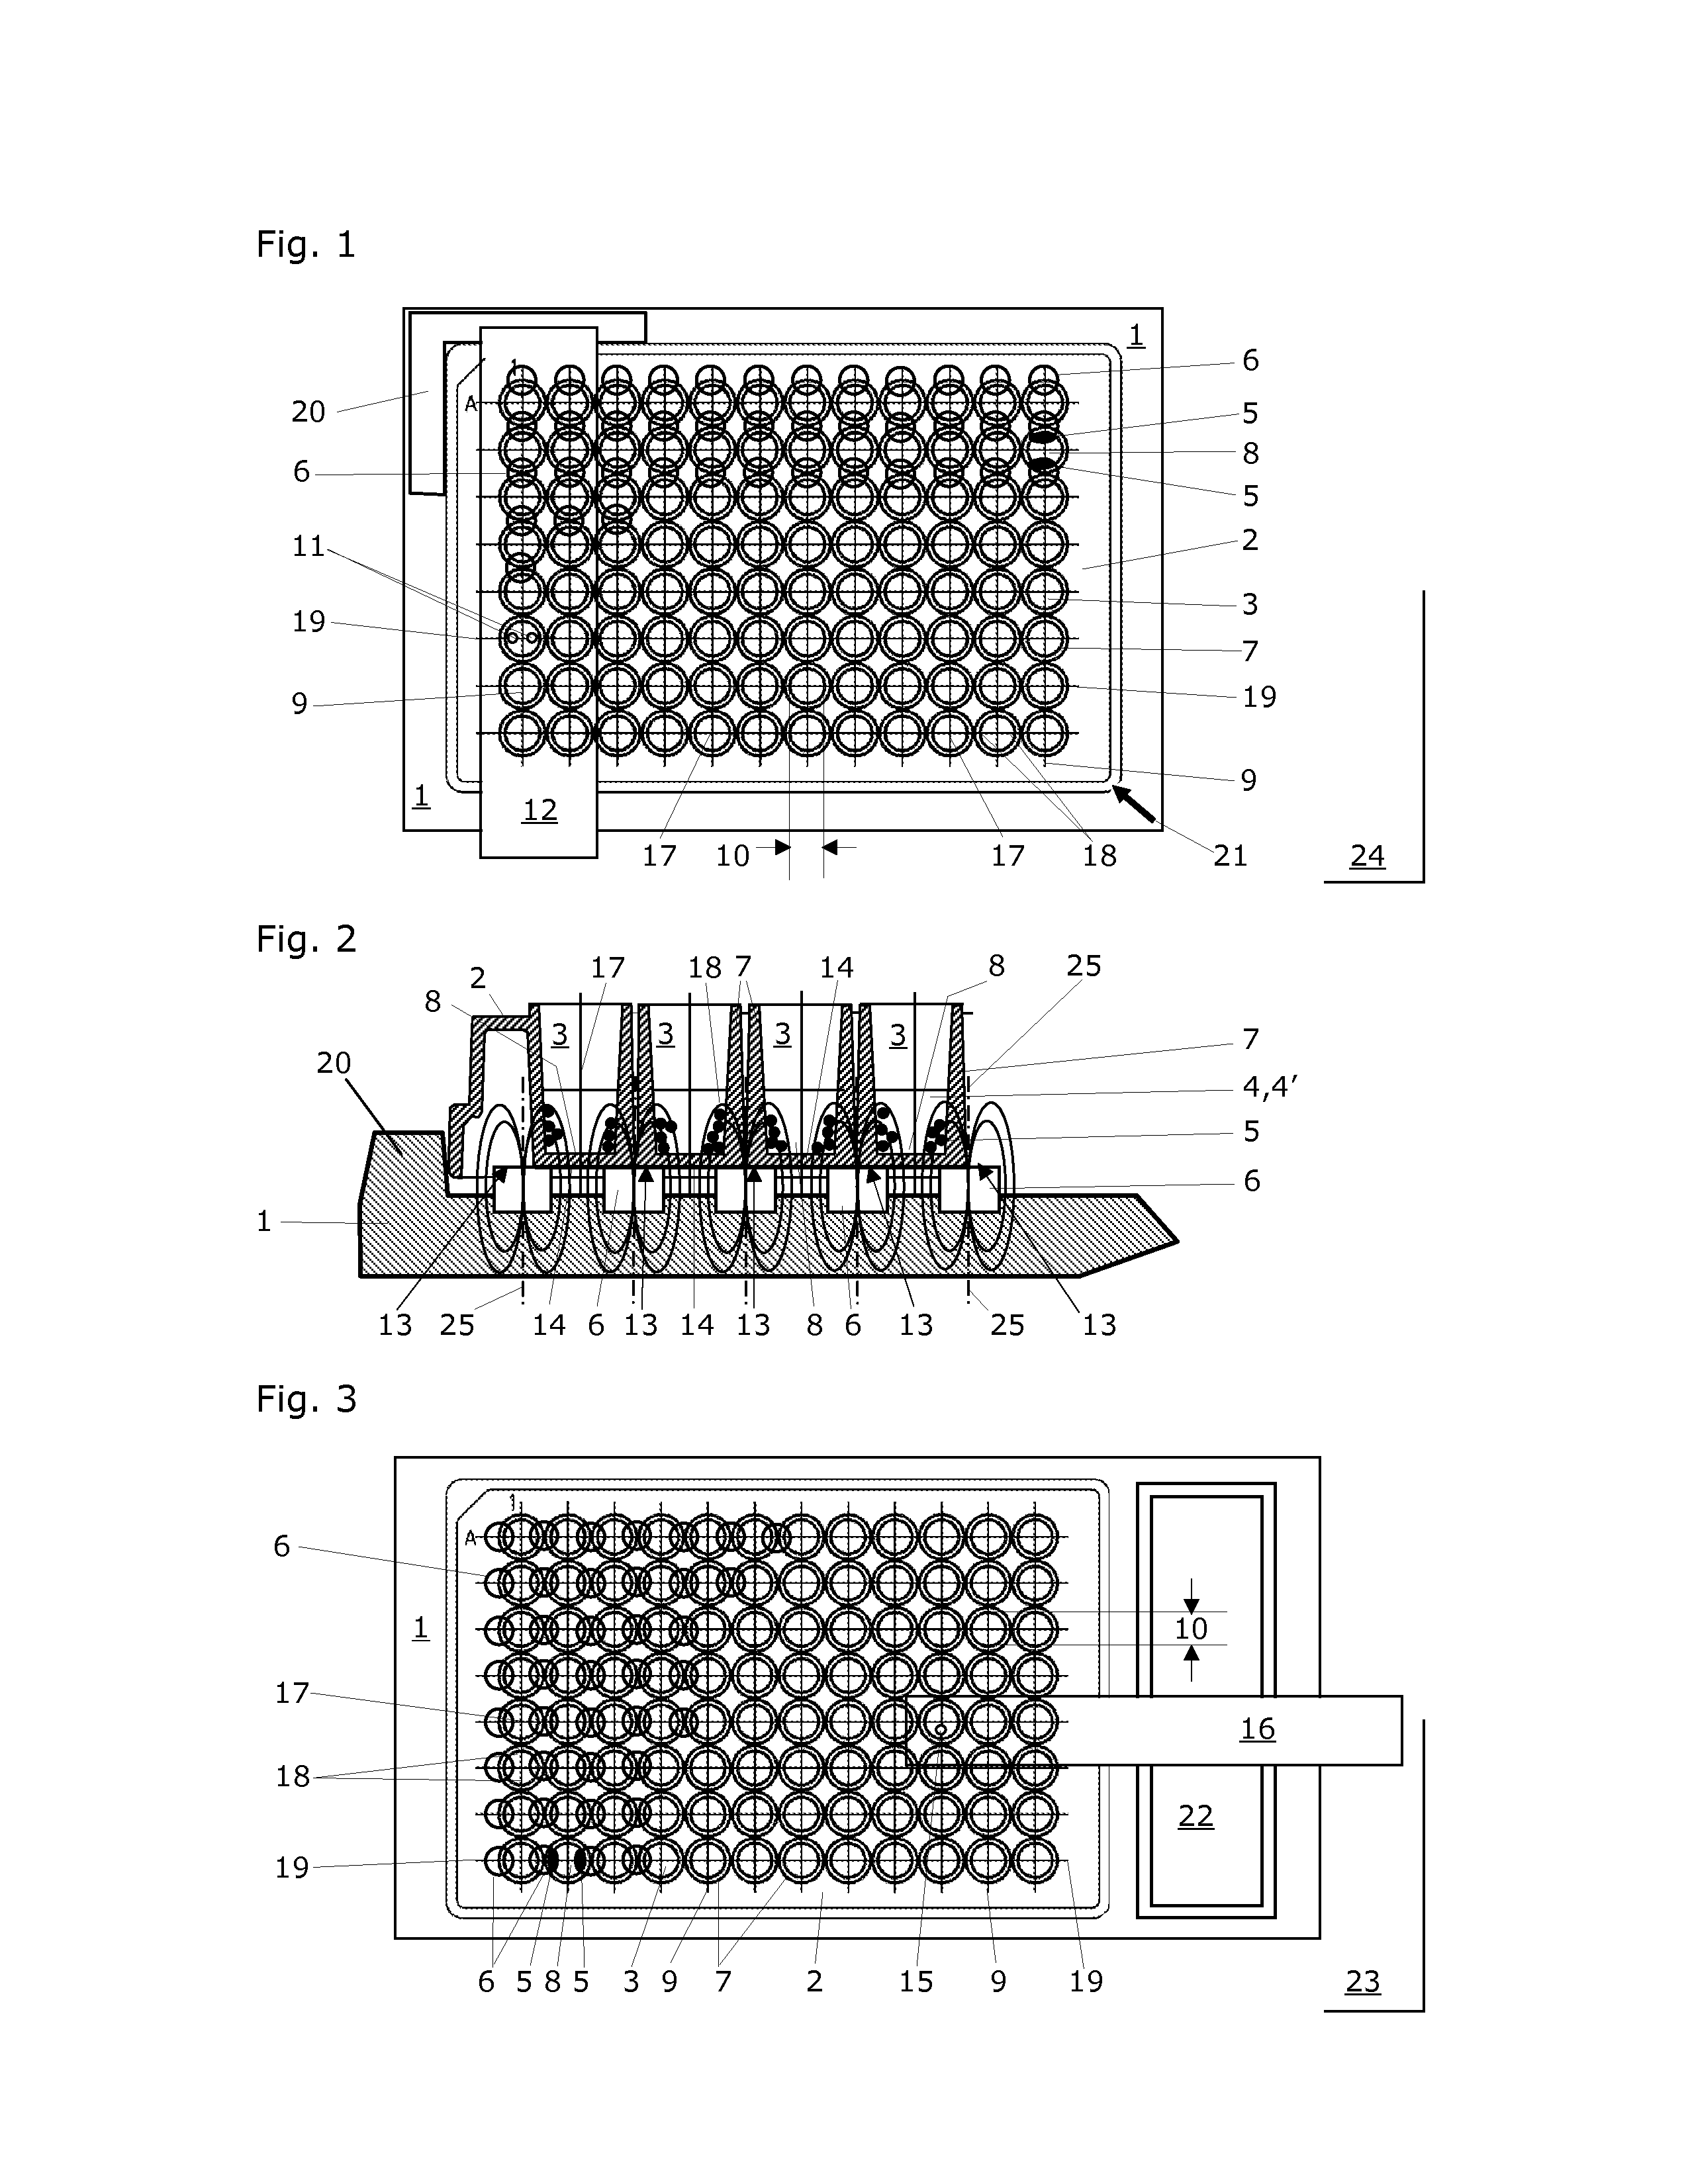 Microplate carrier having magnets